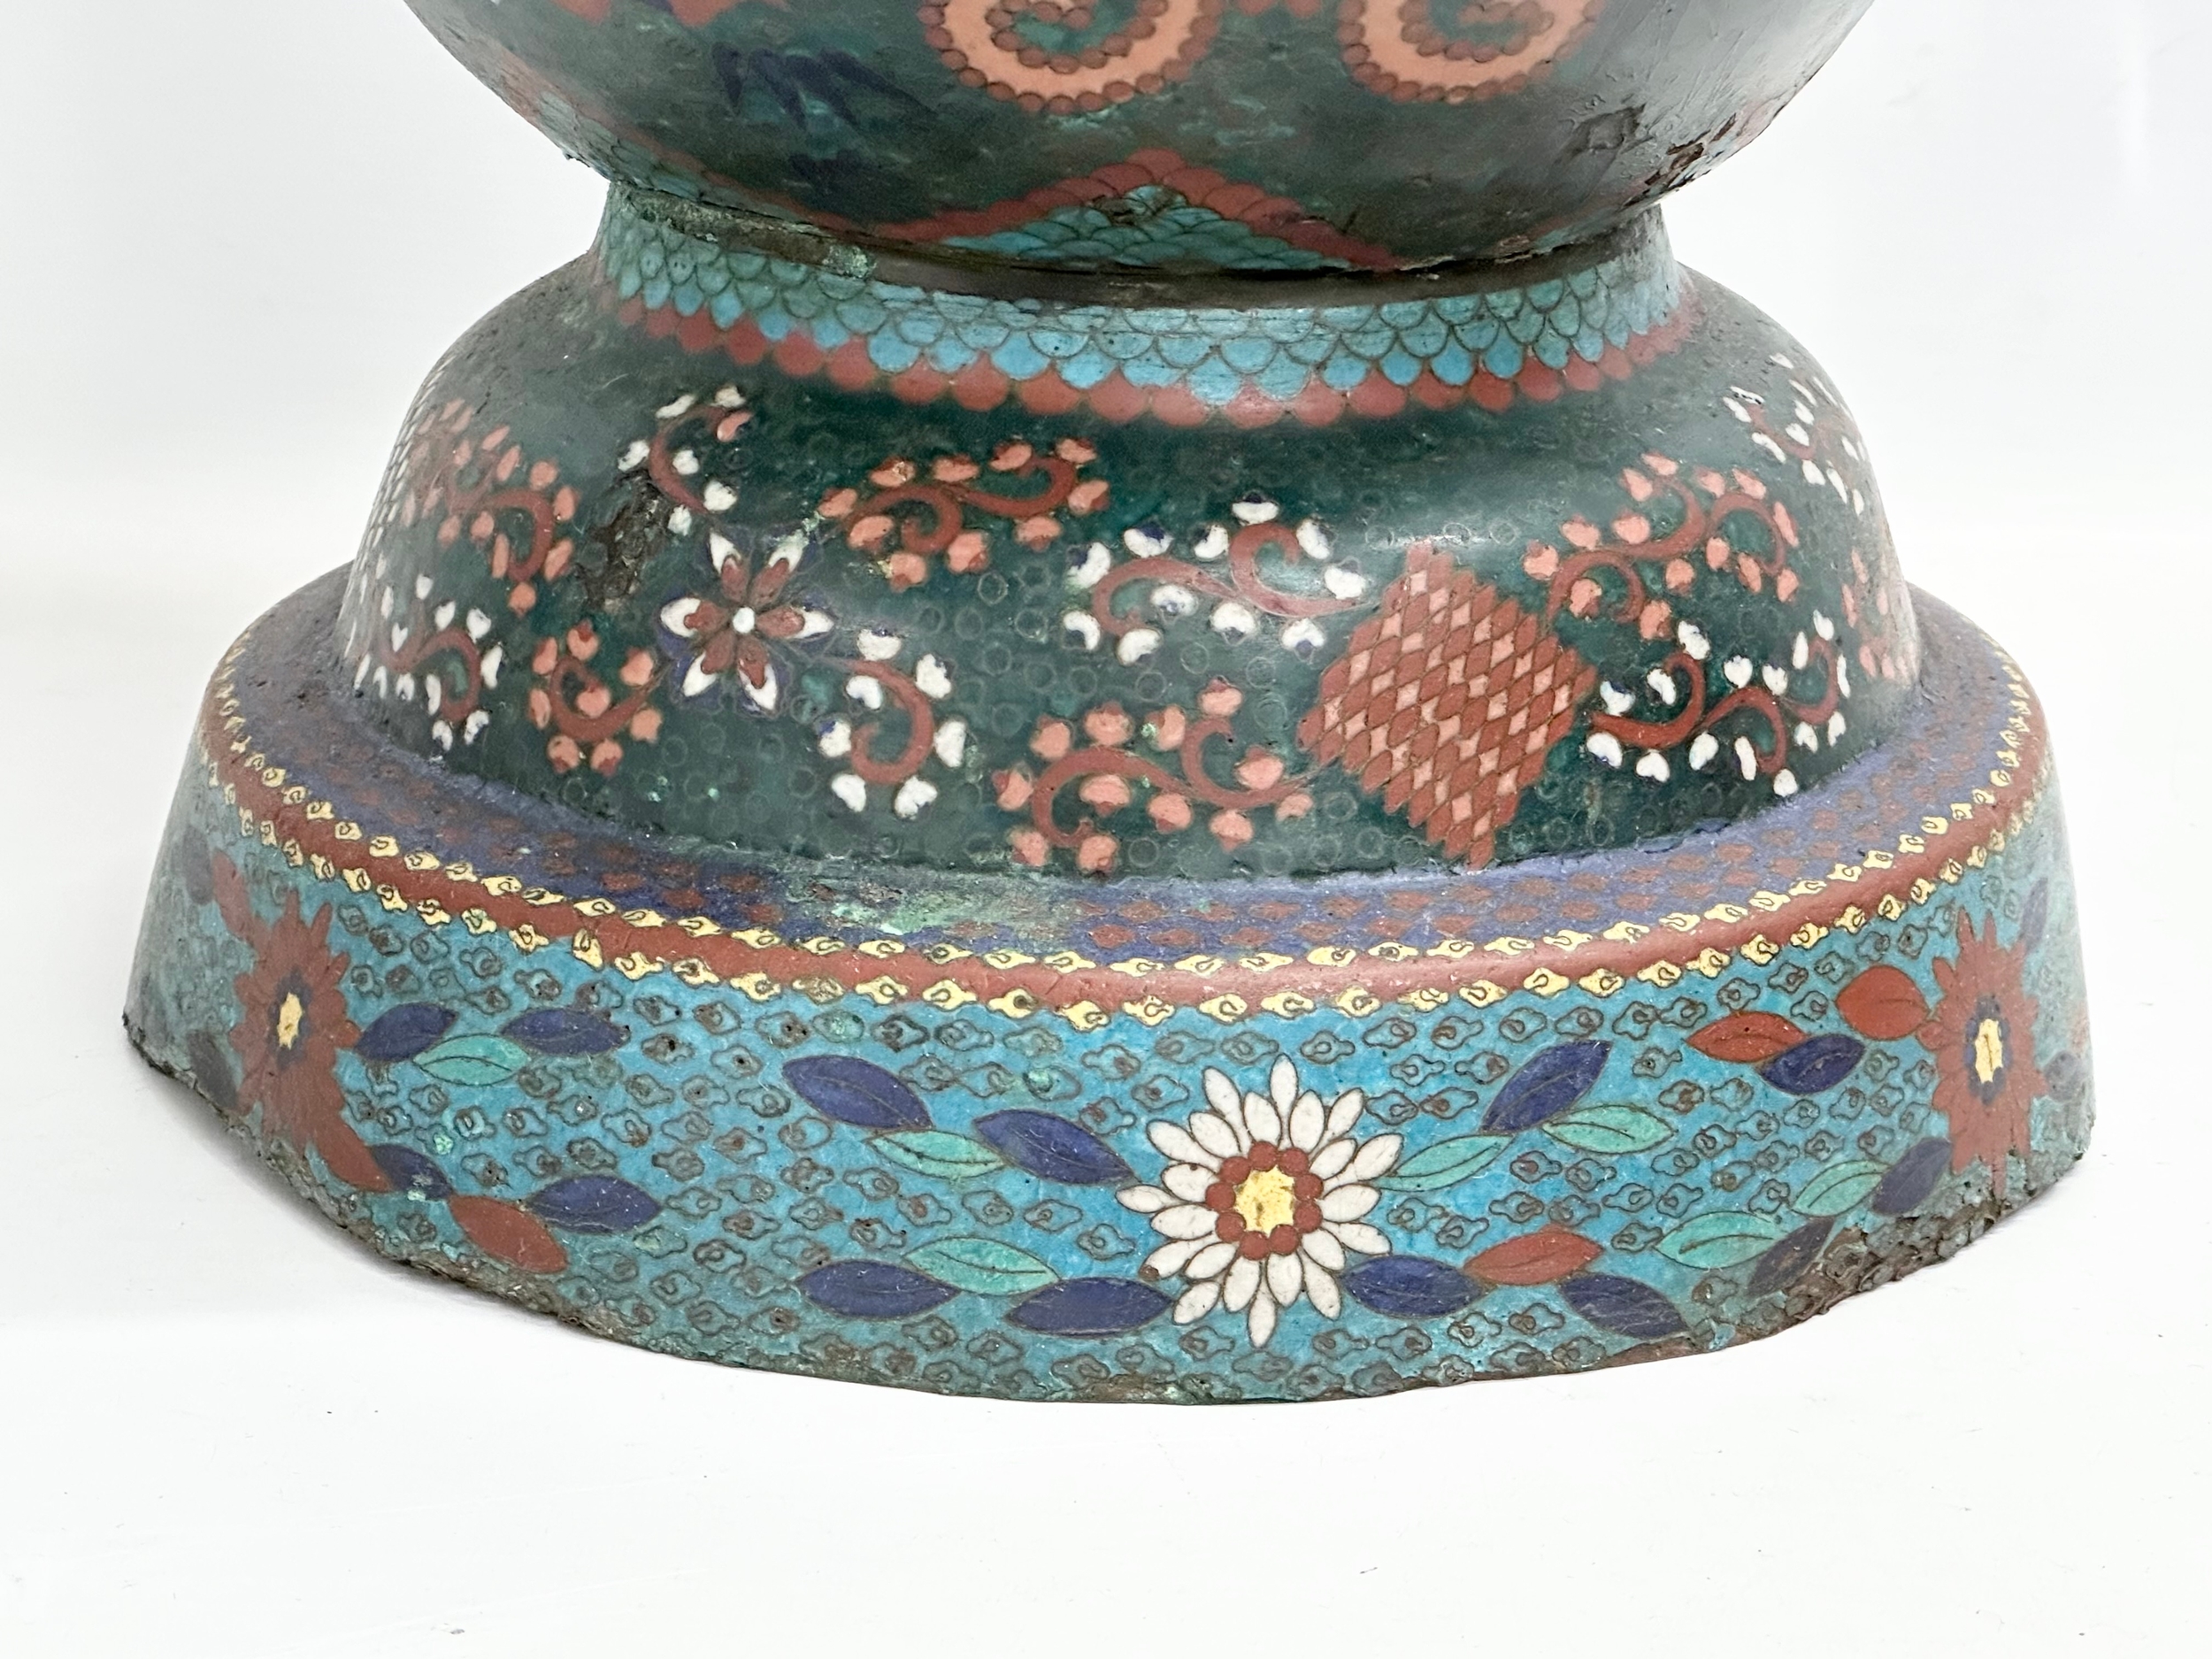 A very large late 19th century Japanese Meiji period cloisonné enamelled pot. Circa 1880-1900. - Image 2 of 7